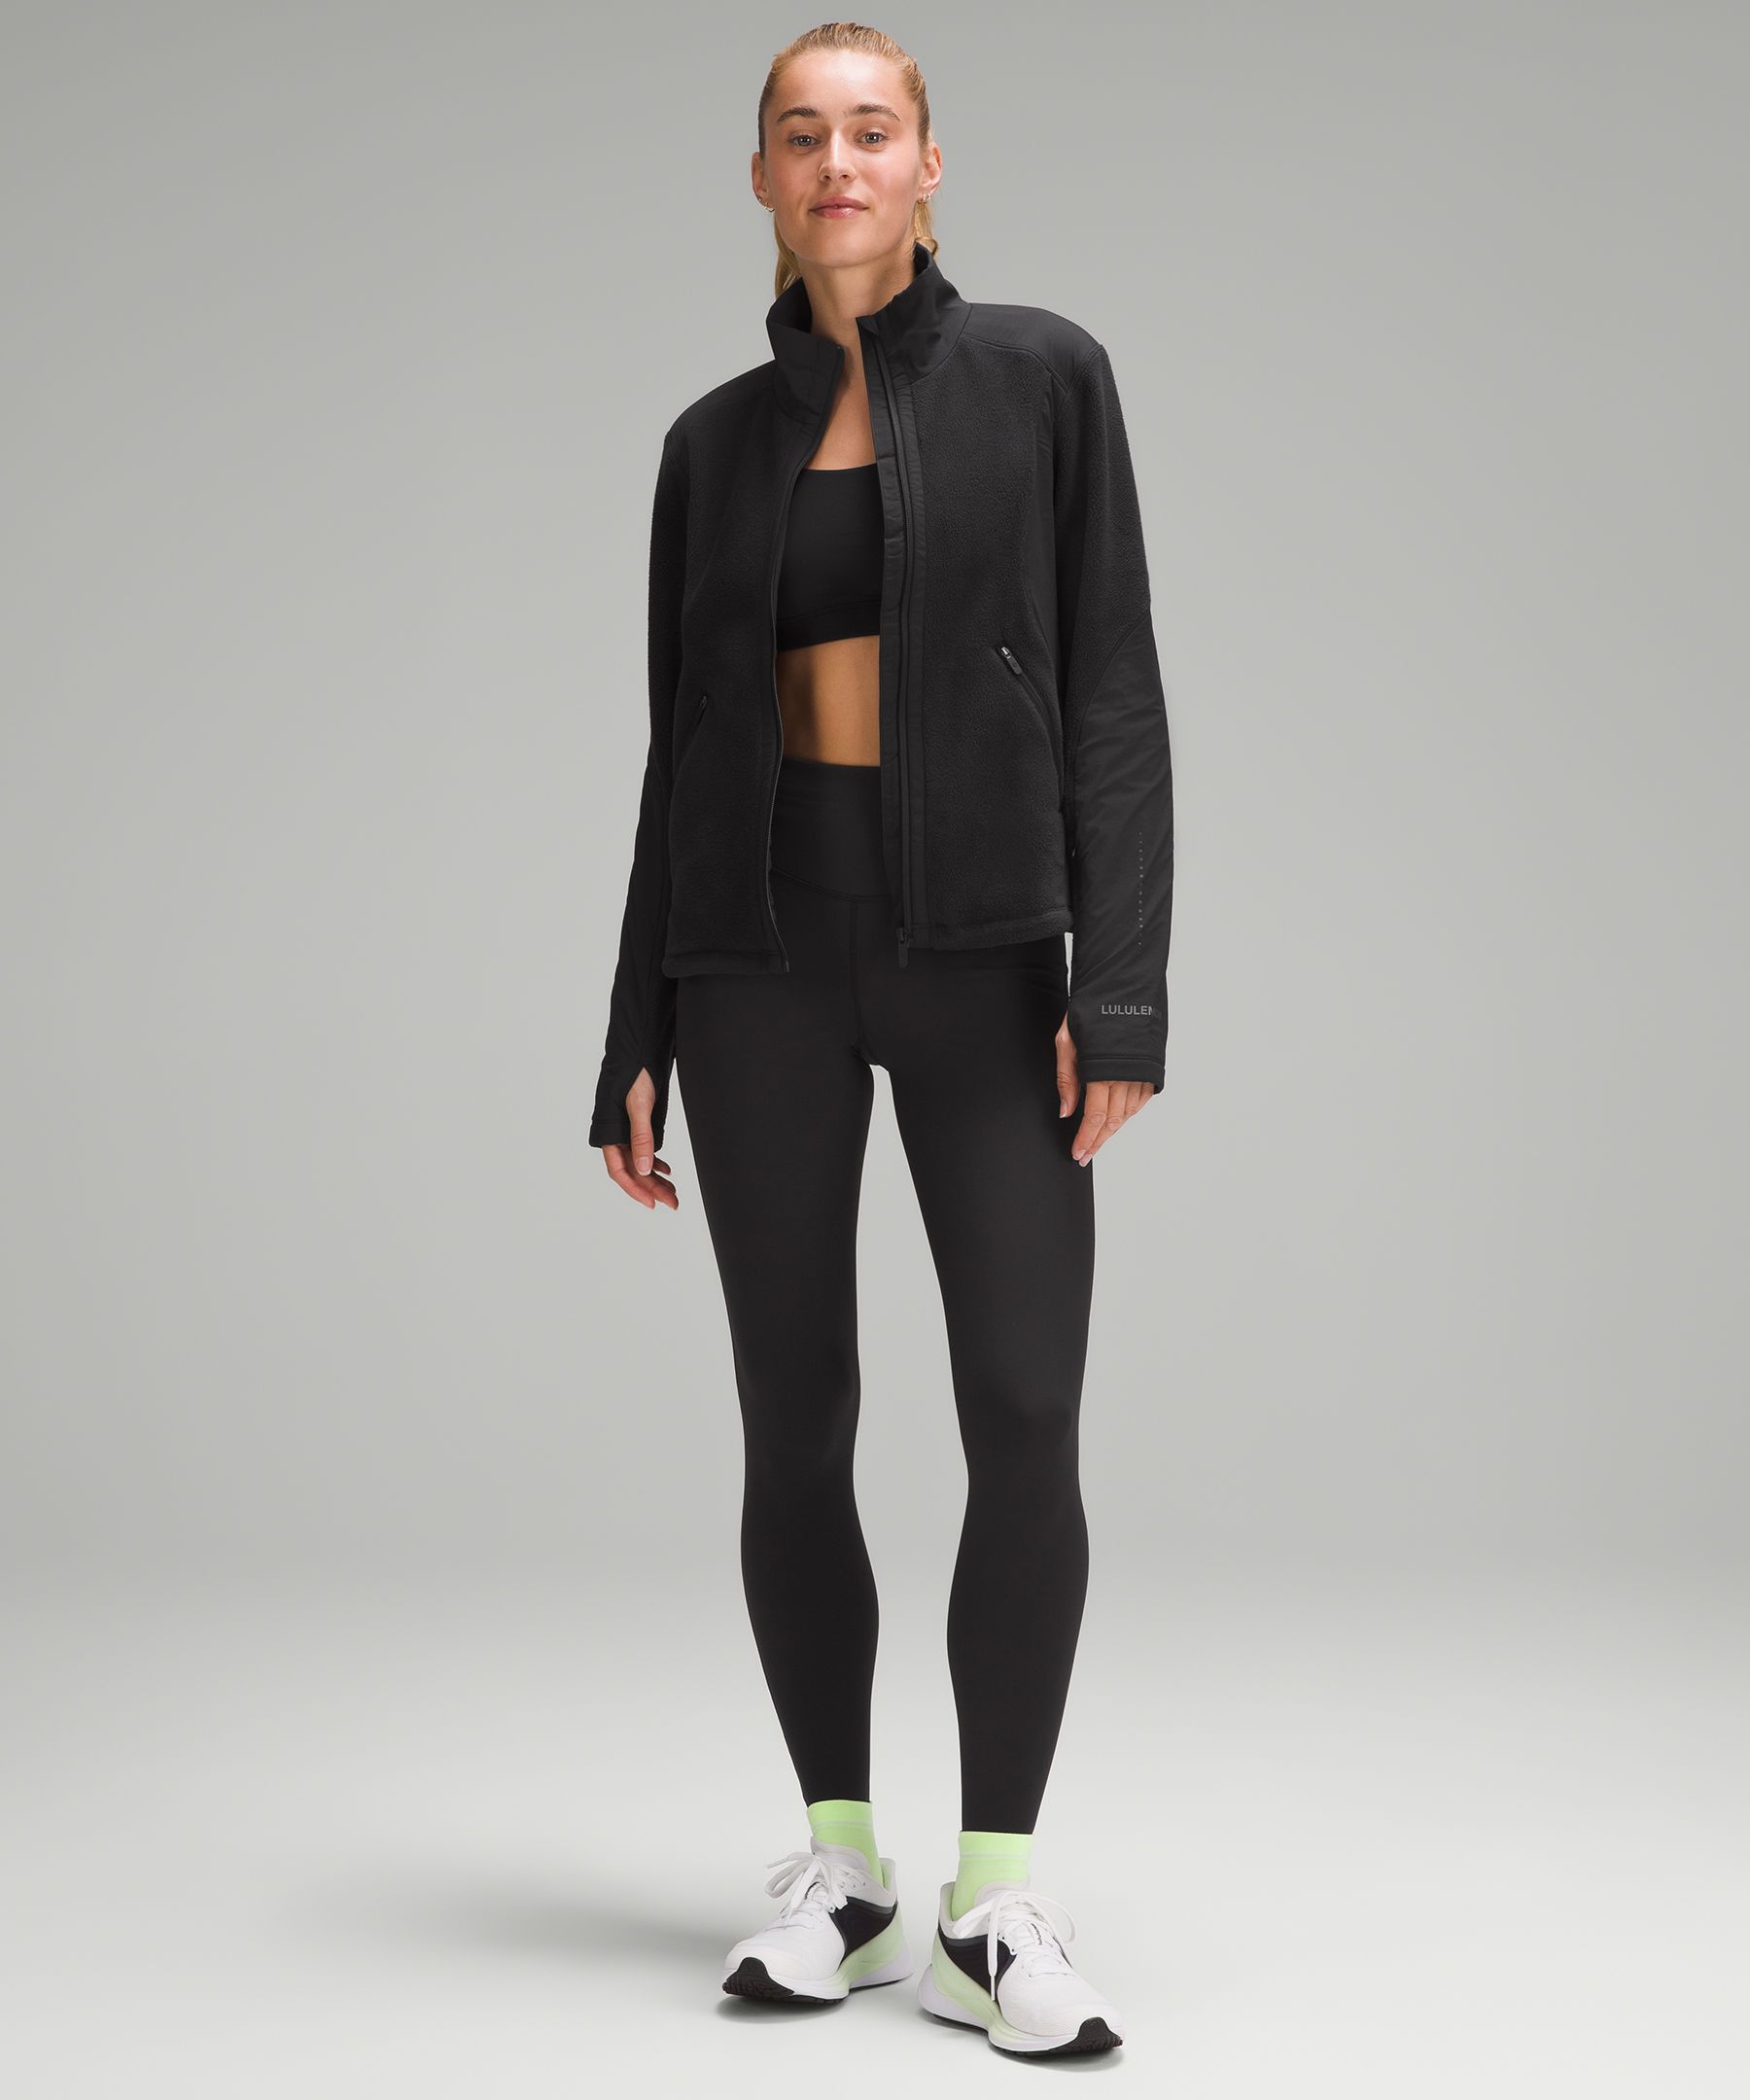 This fleece jacket from Lululemon is already selling out, snag it fast